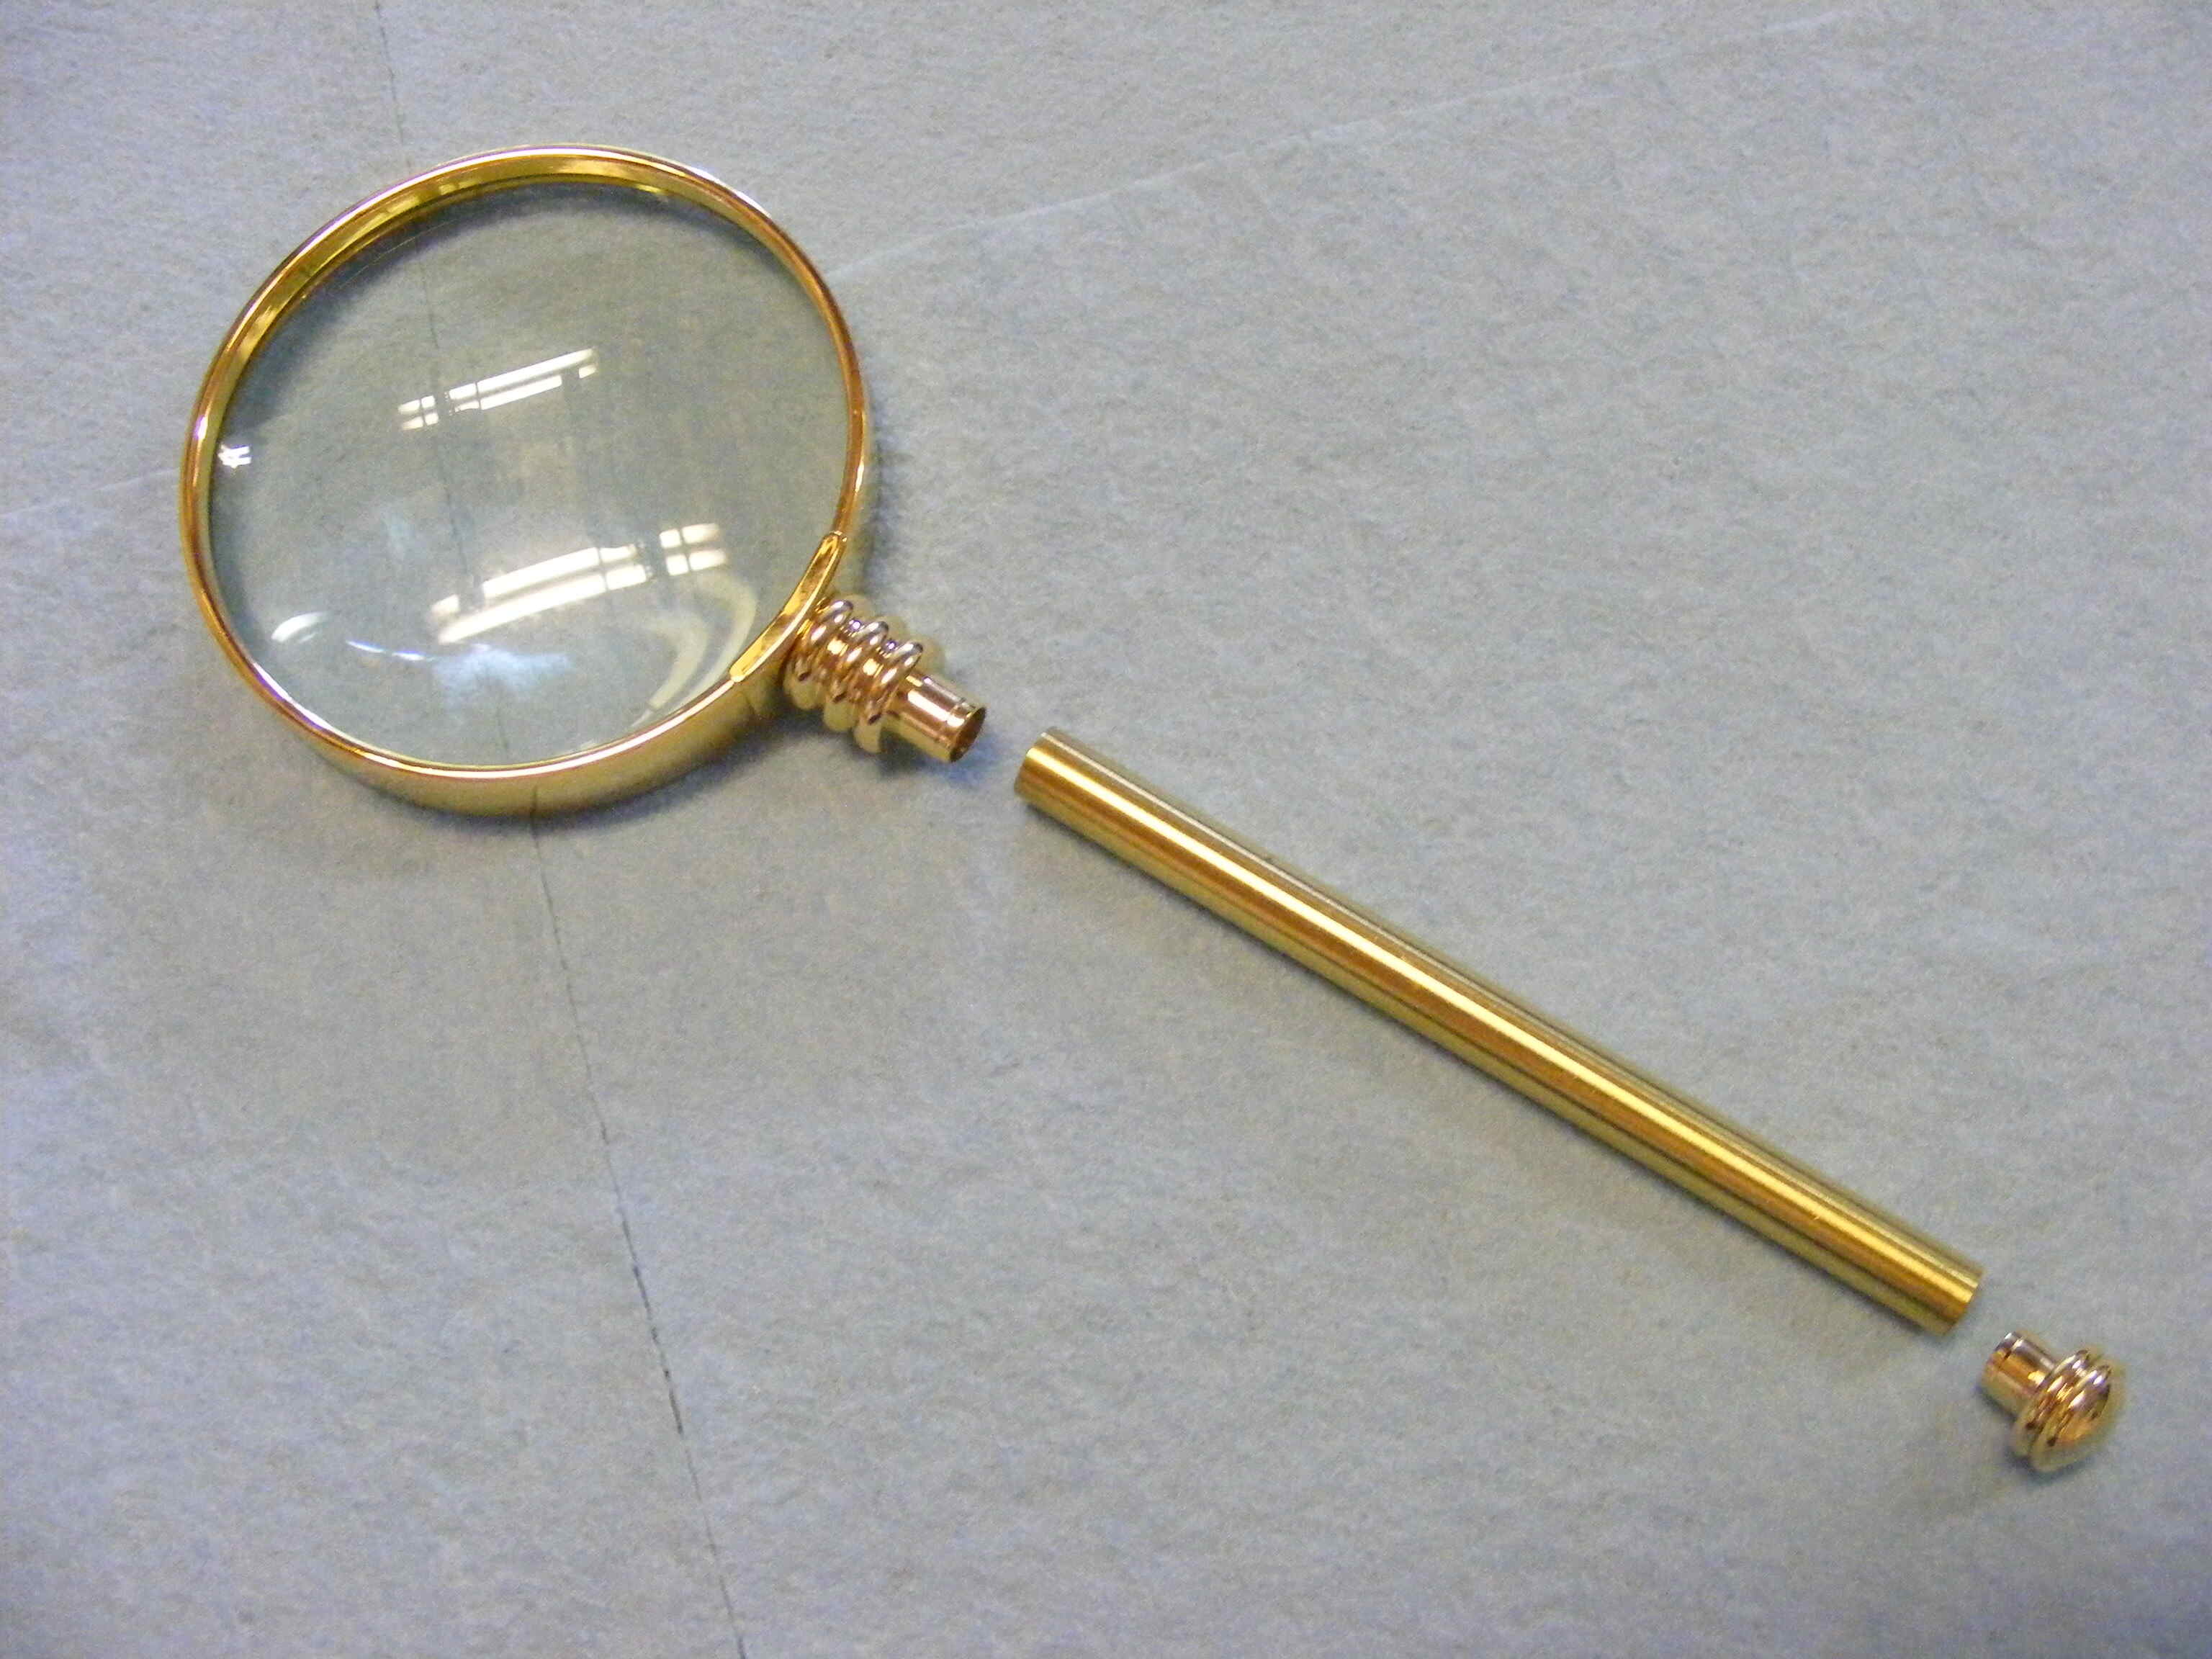 DIY Magnifiers: Creating Your Own Magnifying Glass